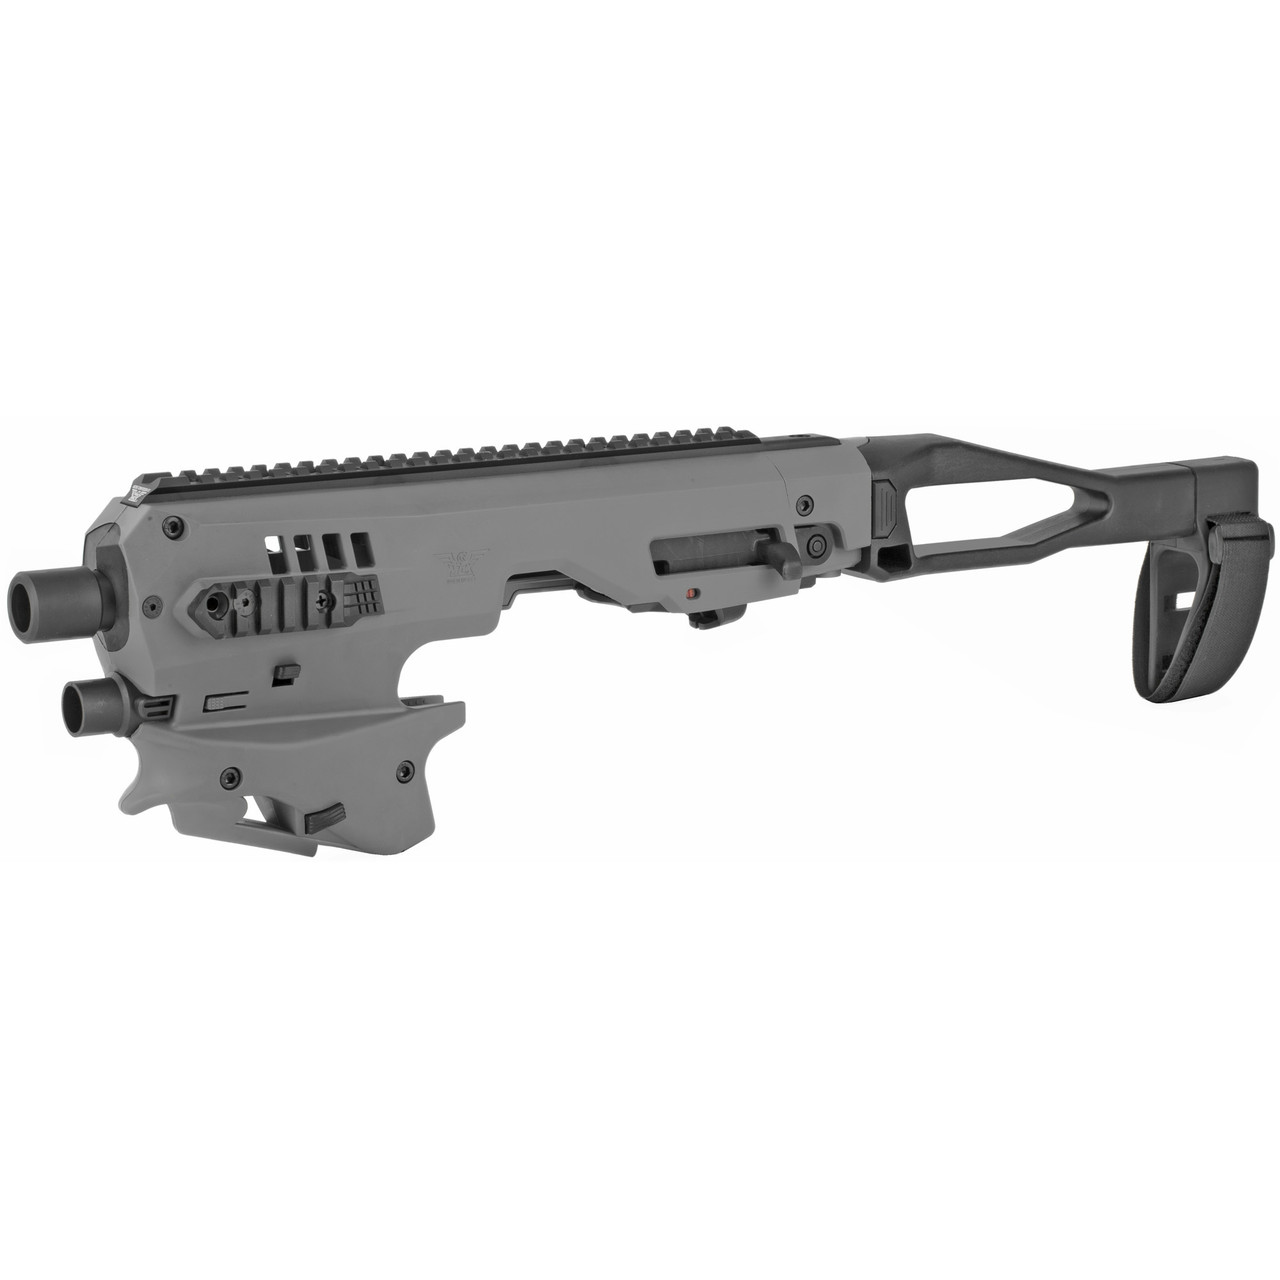 MCK Micro Conversion Kit, Glock Carbine for Glock 17, 19, 22 and More